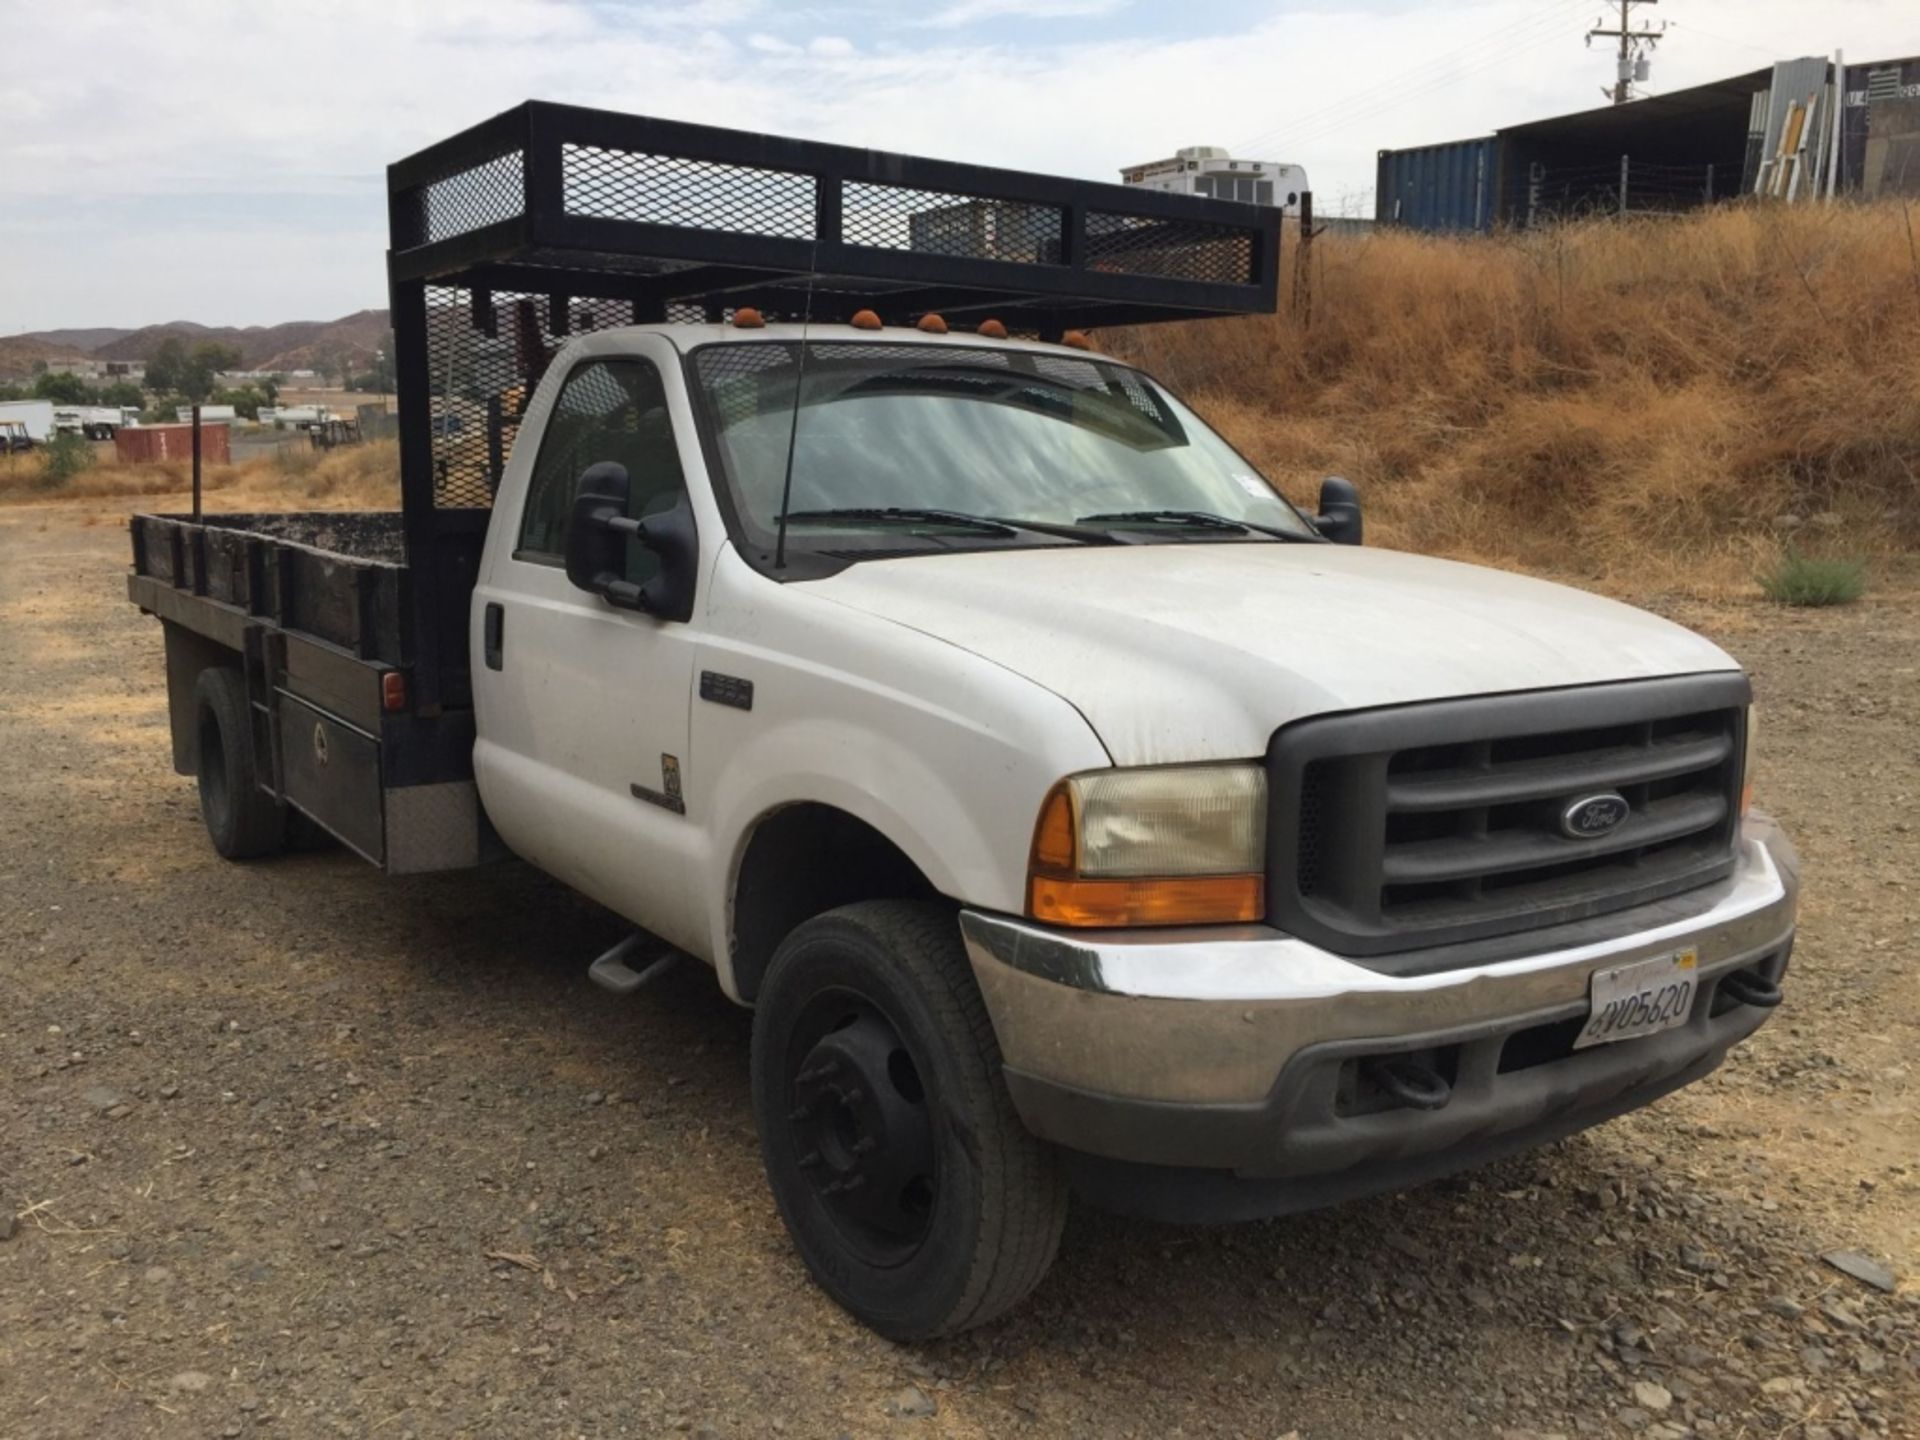 Ford F550 Flatbed Truck, - Image 2 of 72